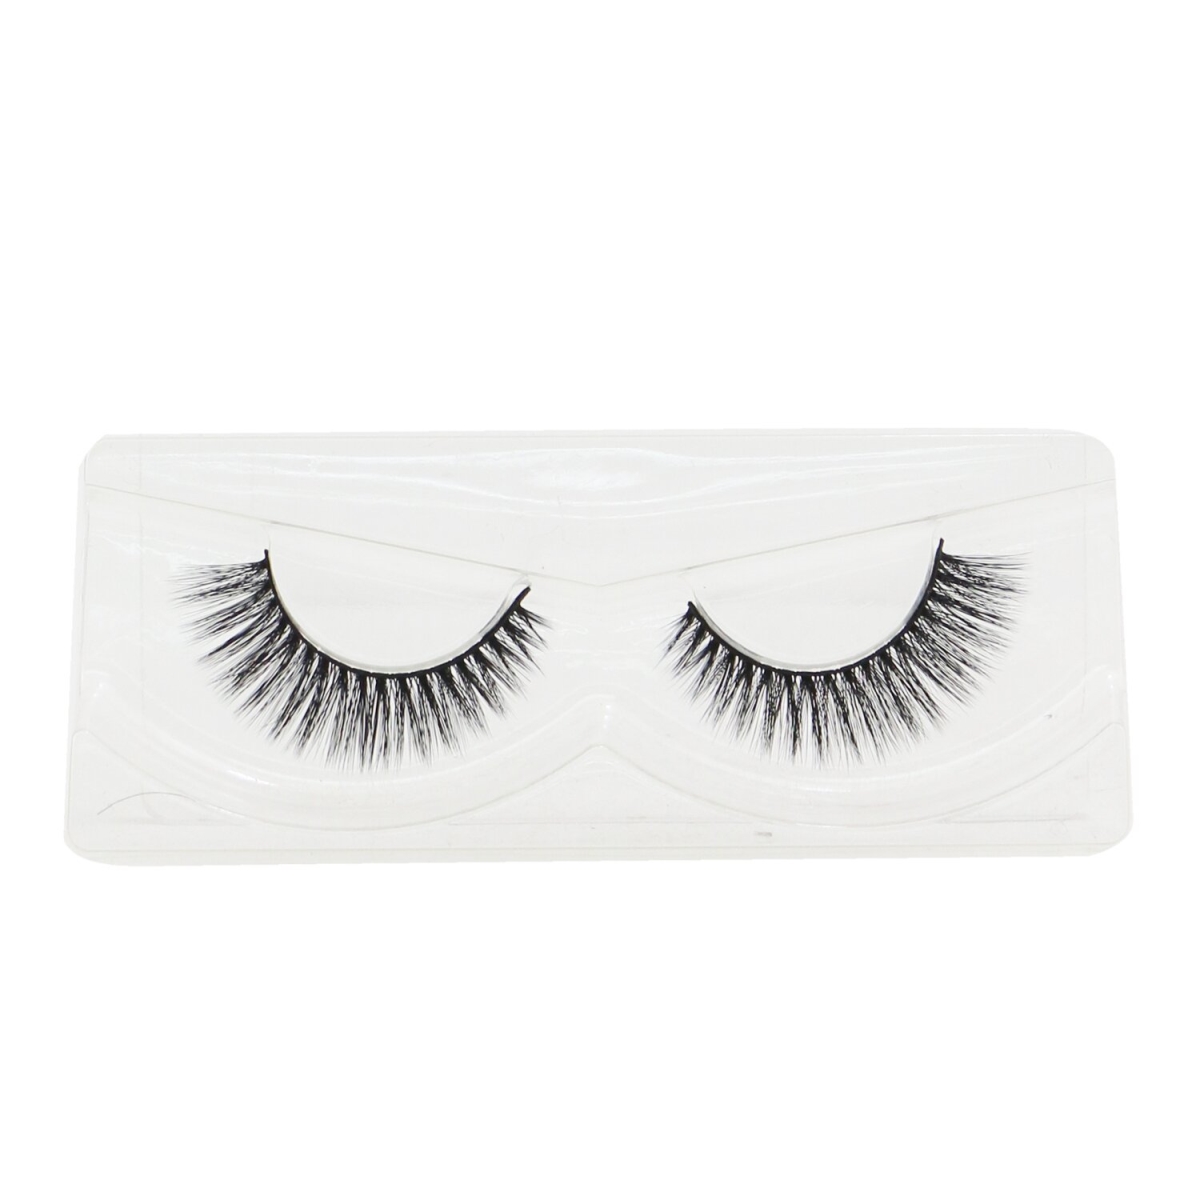 Picture of Lash Star 263456 Visionary Eye Lashes, No.005 4-11 mm, Full Volume